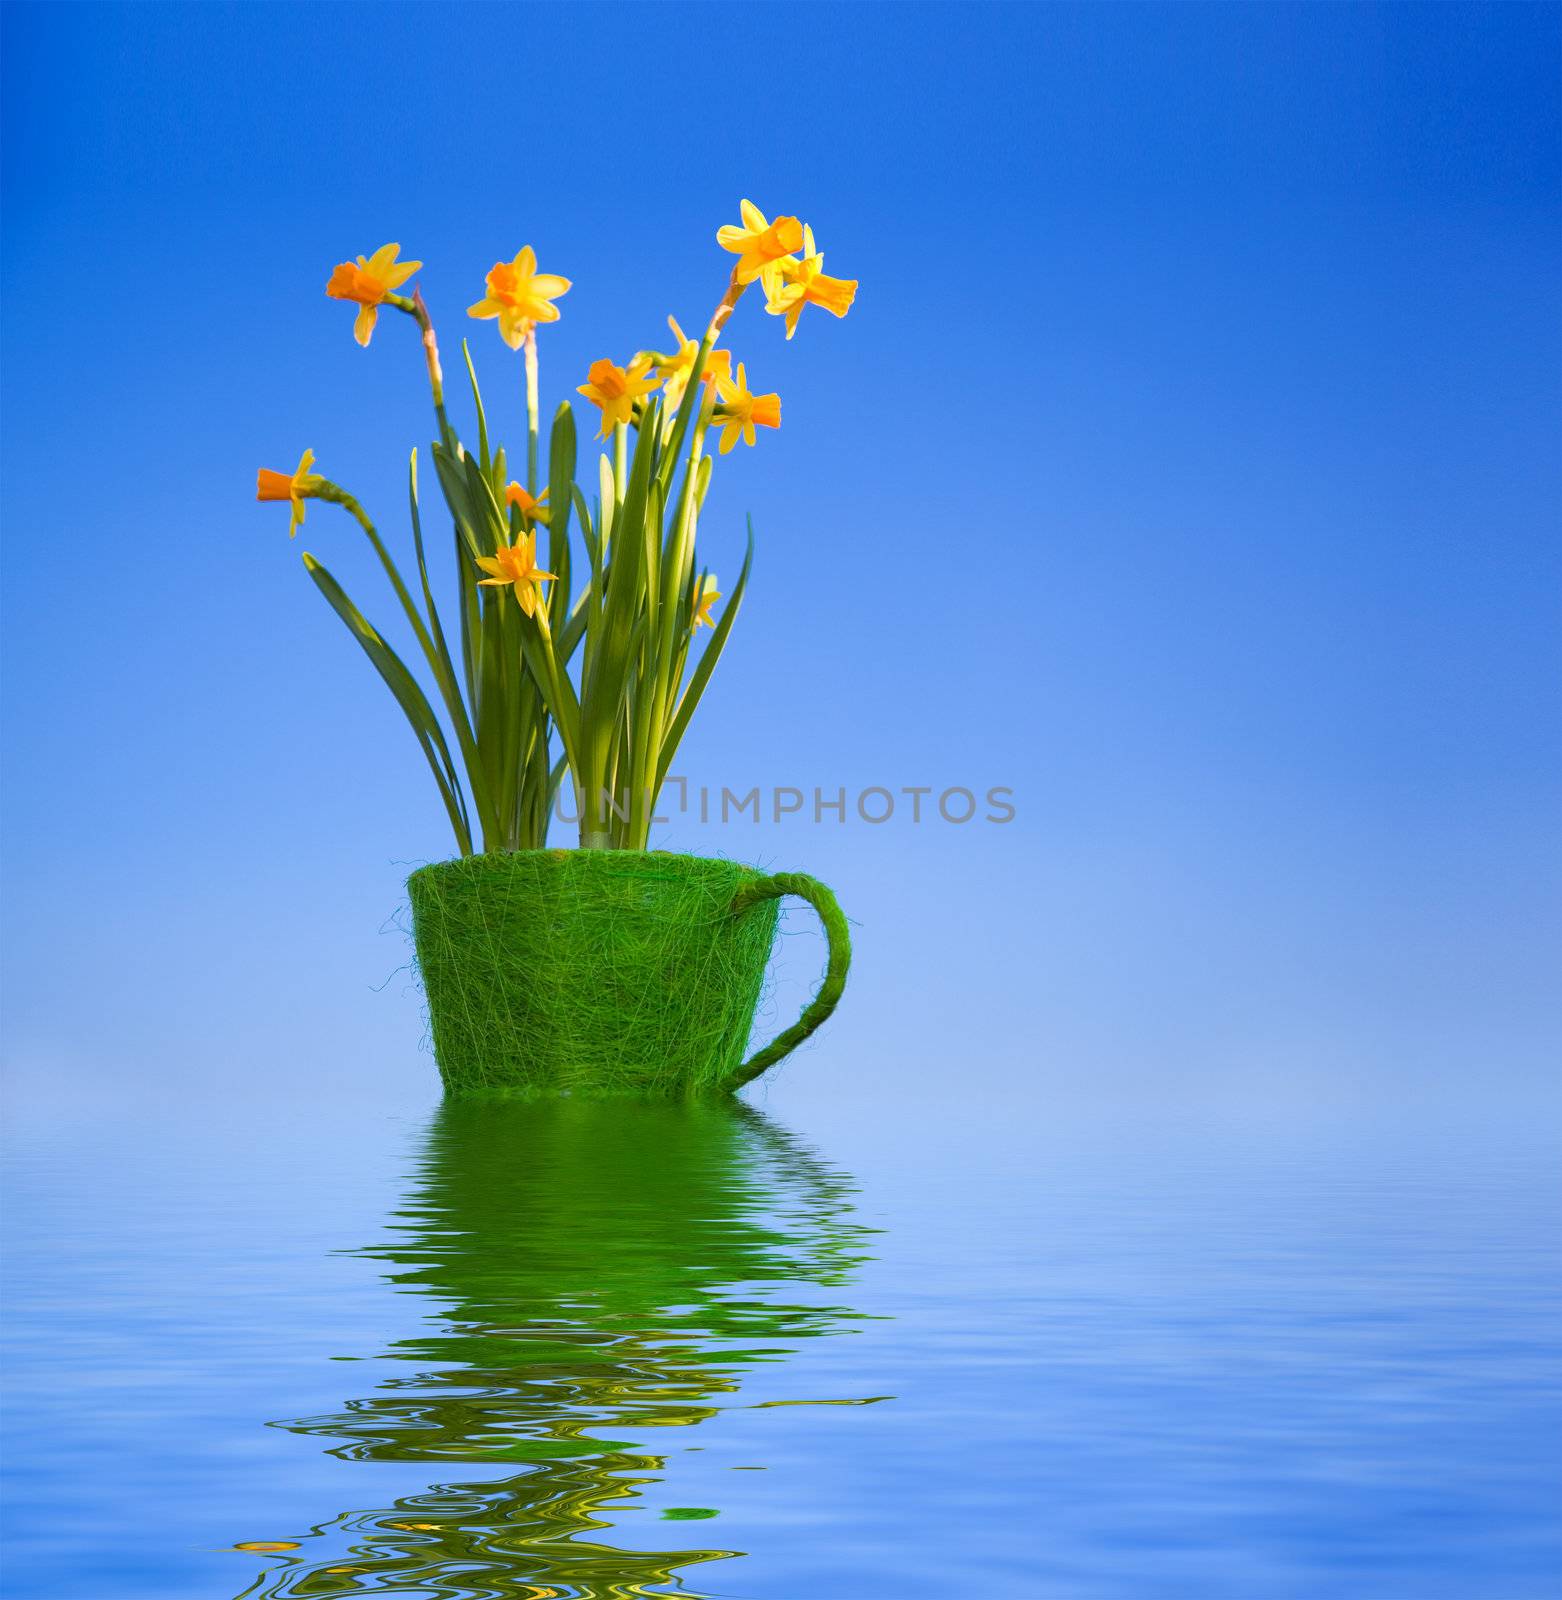 Digital composition of flowers in grassy flowerpot reflected in water